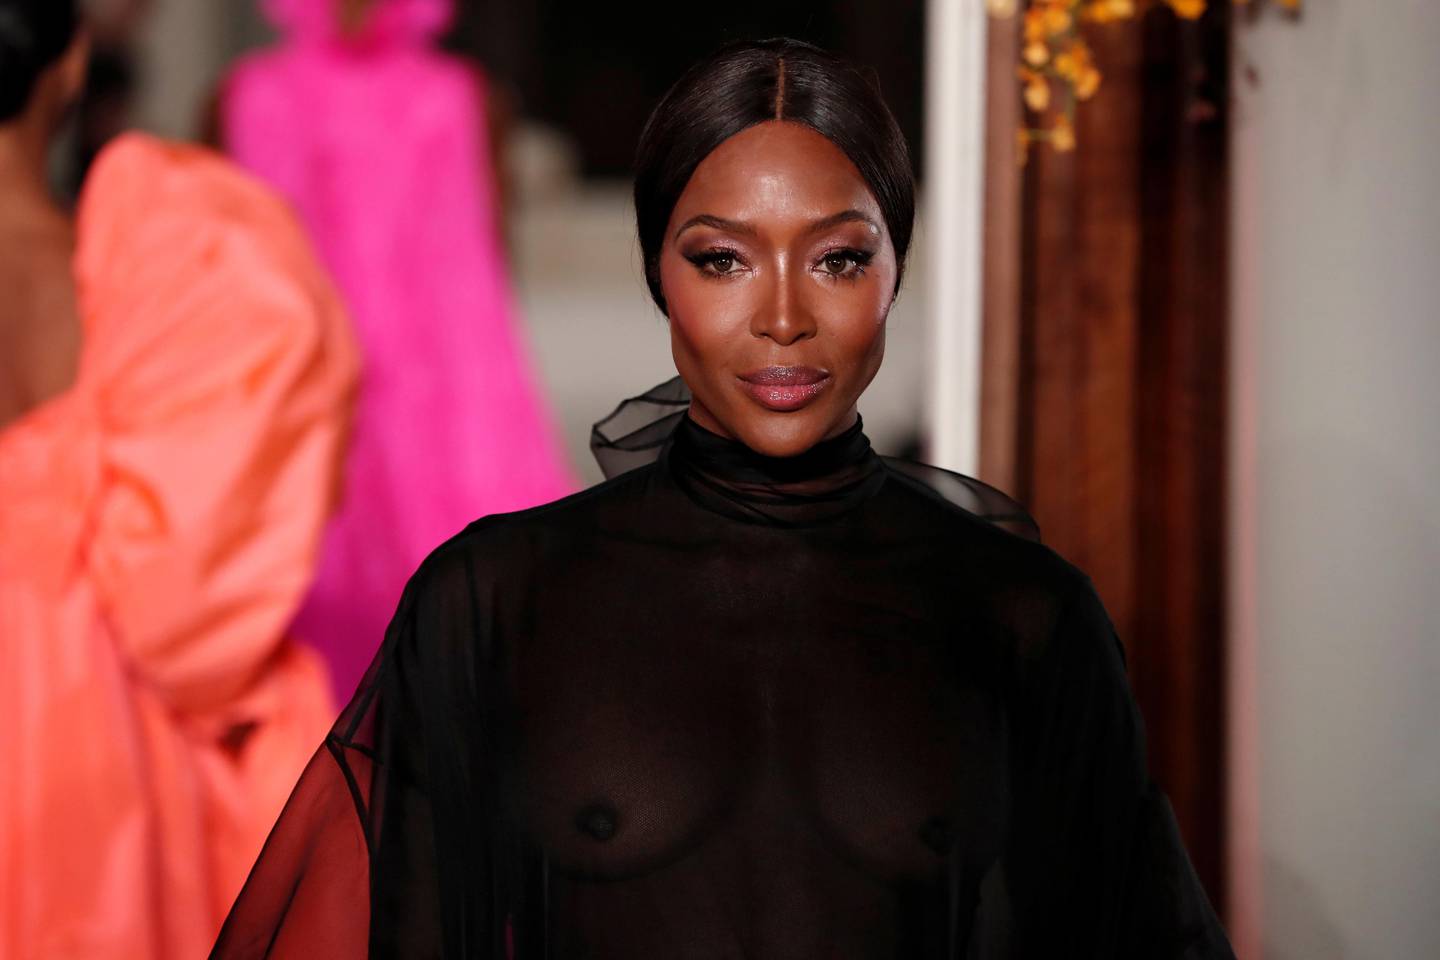 Model Naomi Campbell presents a creation by Italian designer Pier Paolo Piccioli as part of his Haute Couture Spring-Summer 2019 collection show for fashion house Valentino in Paris, France, January 23, 2019. REUTERS/Benoit Tessier      TEMPLATE OUT